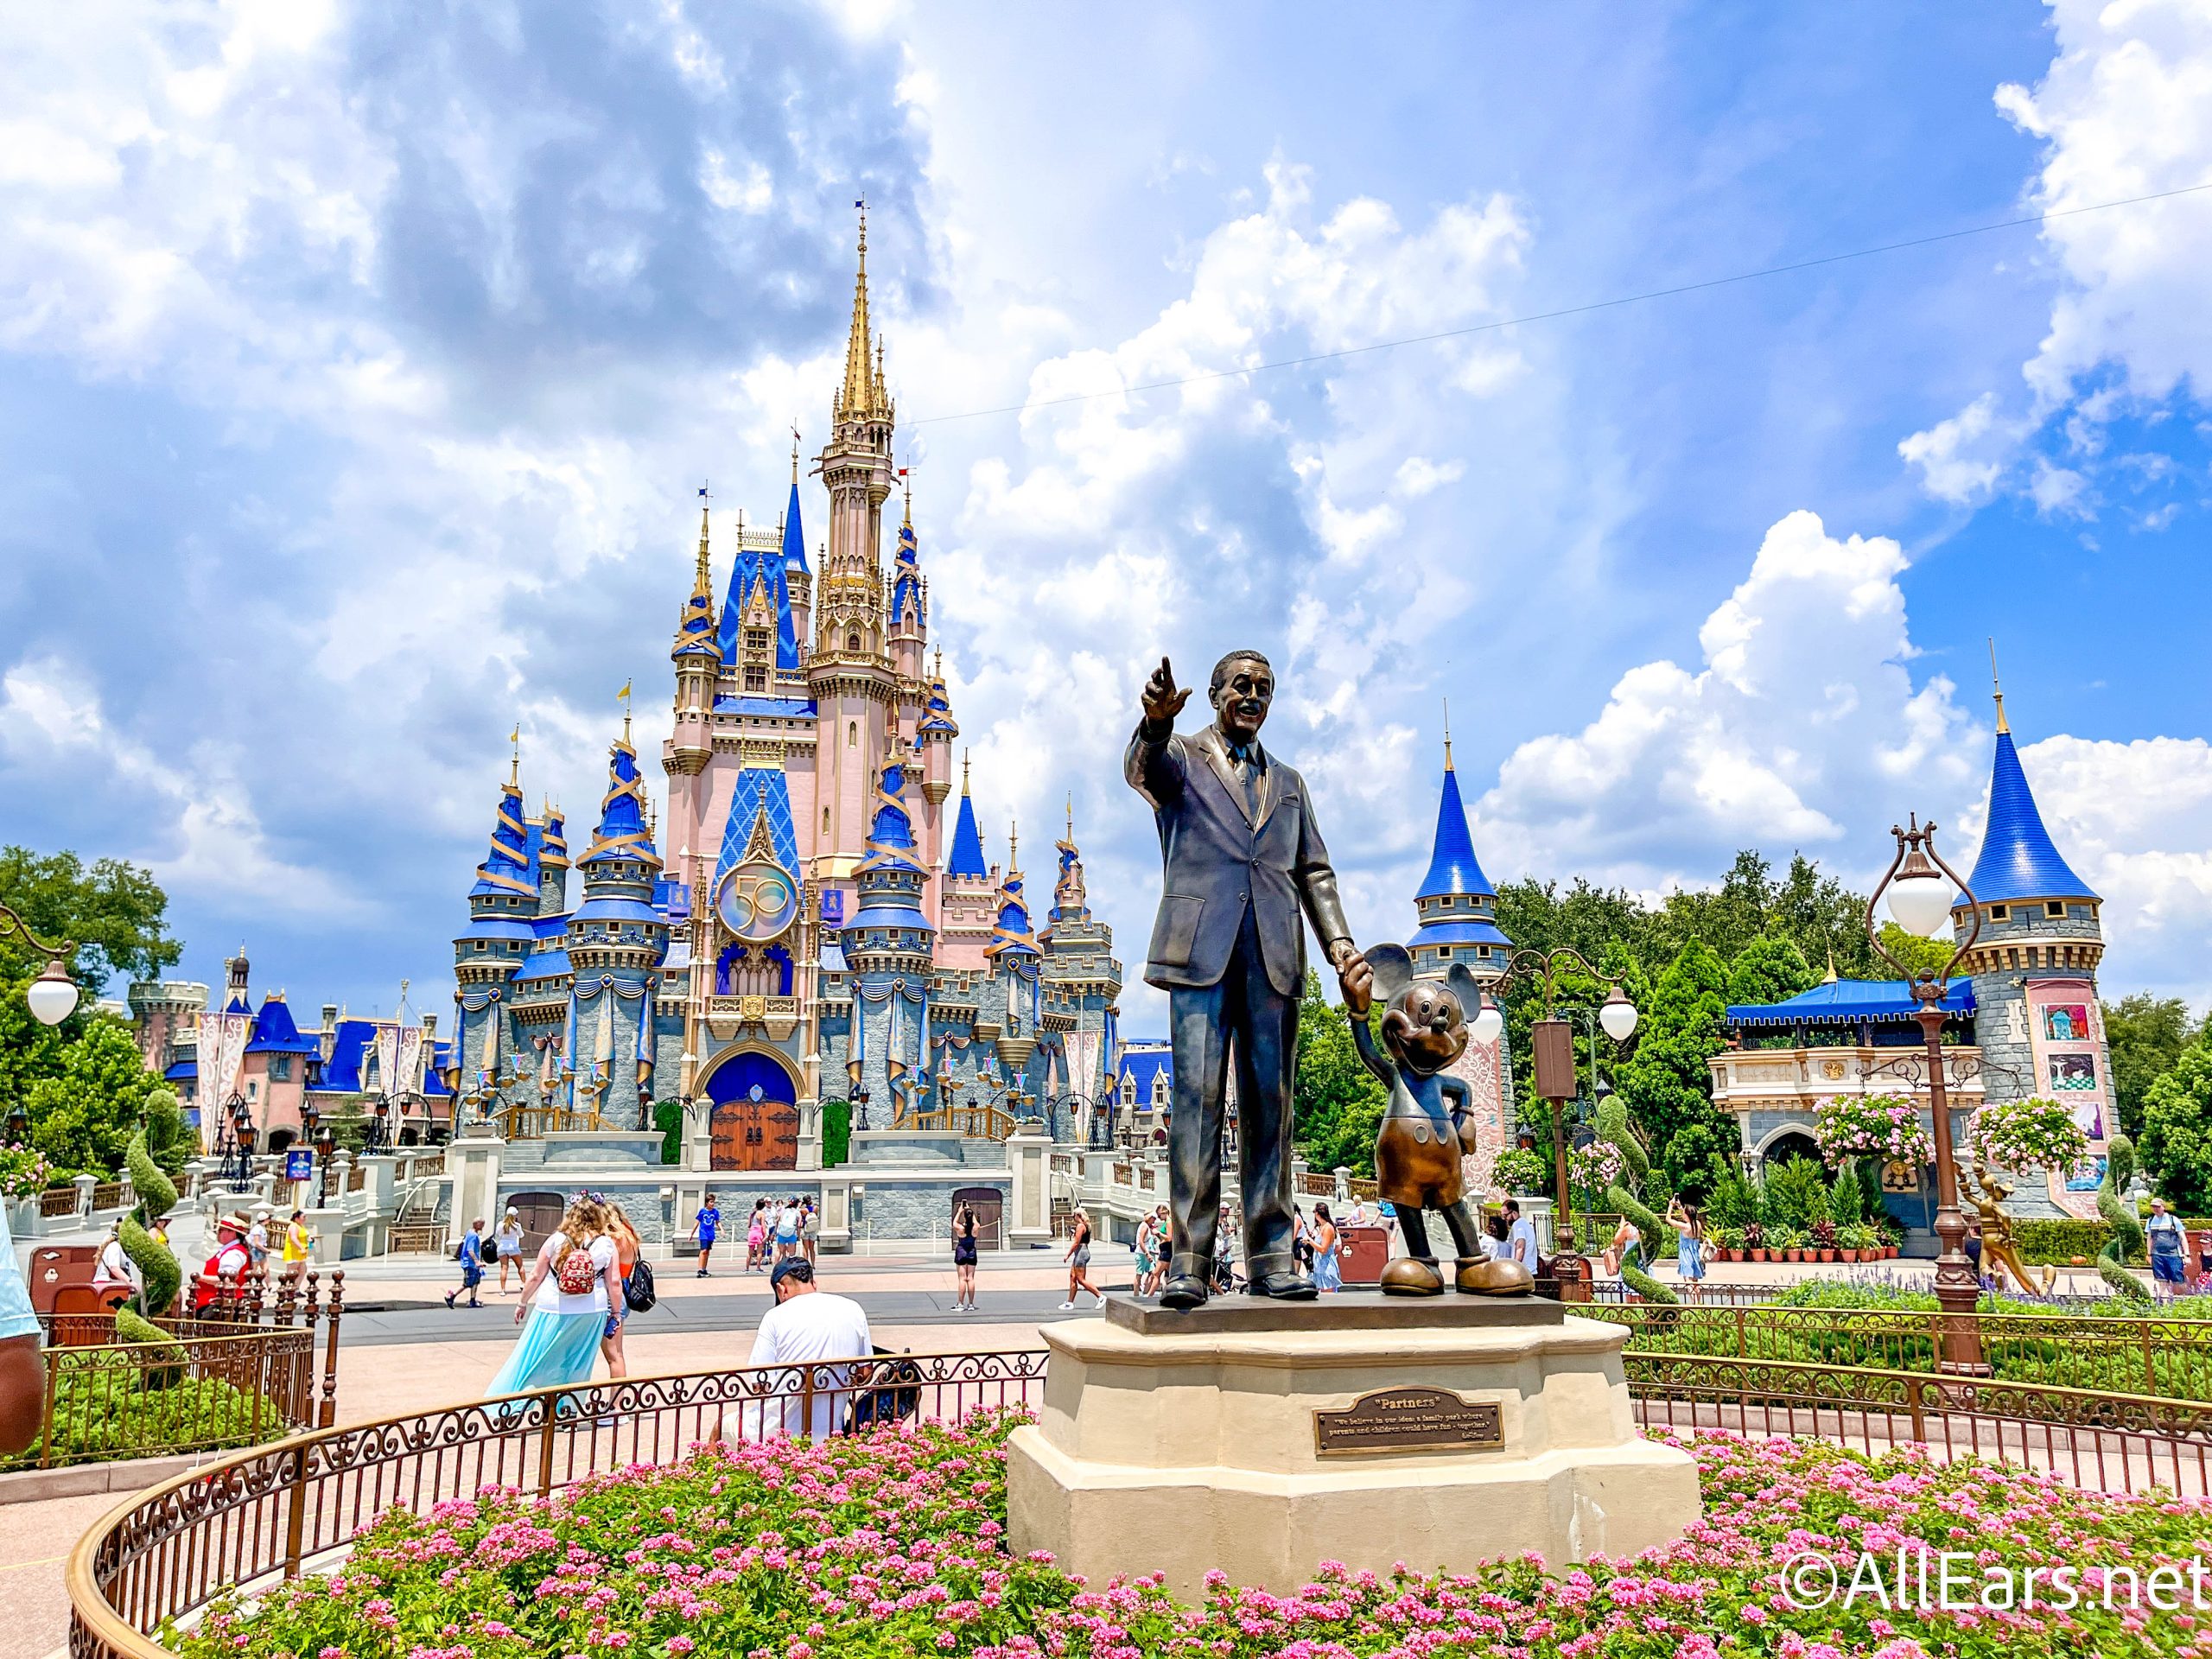 https://allears.net/wp-content/uploads/2022/08/wdw-2022-magic-kingdom-cinderella-castle-stock-partners-statue-walt-and-mickey-scaled.jpg